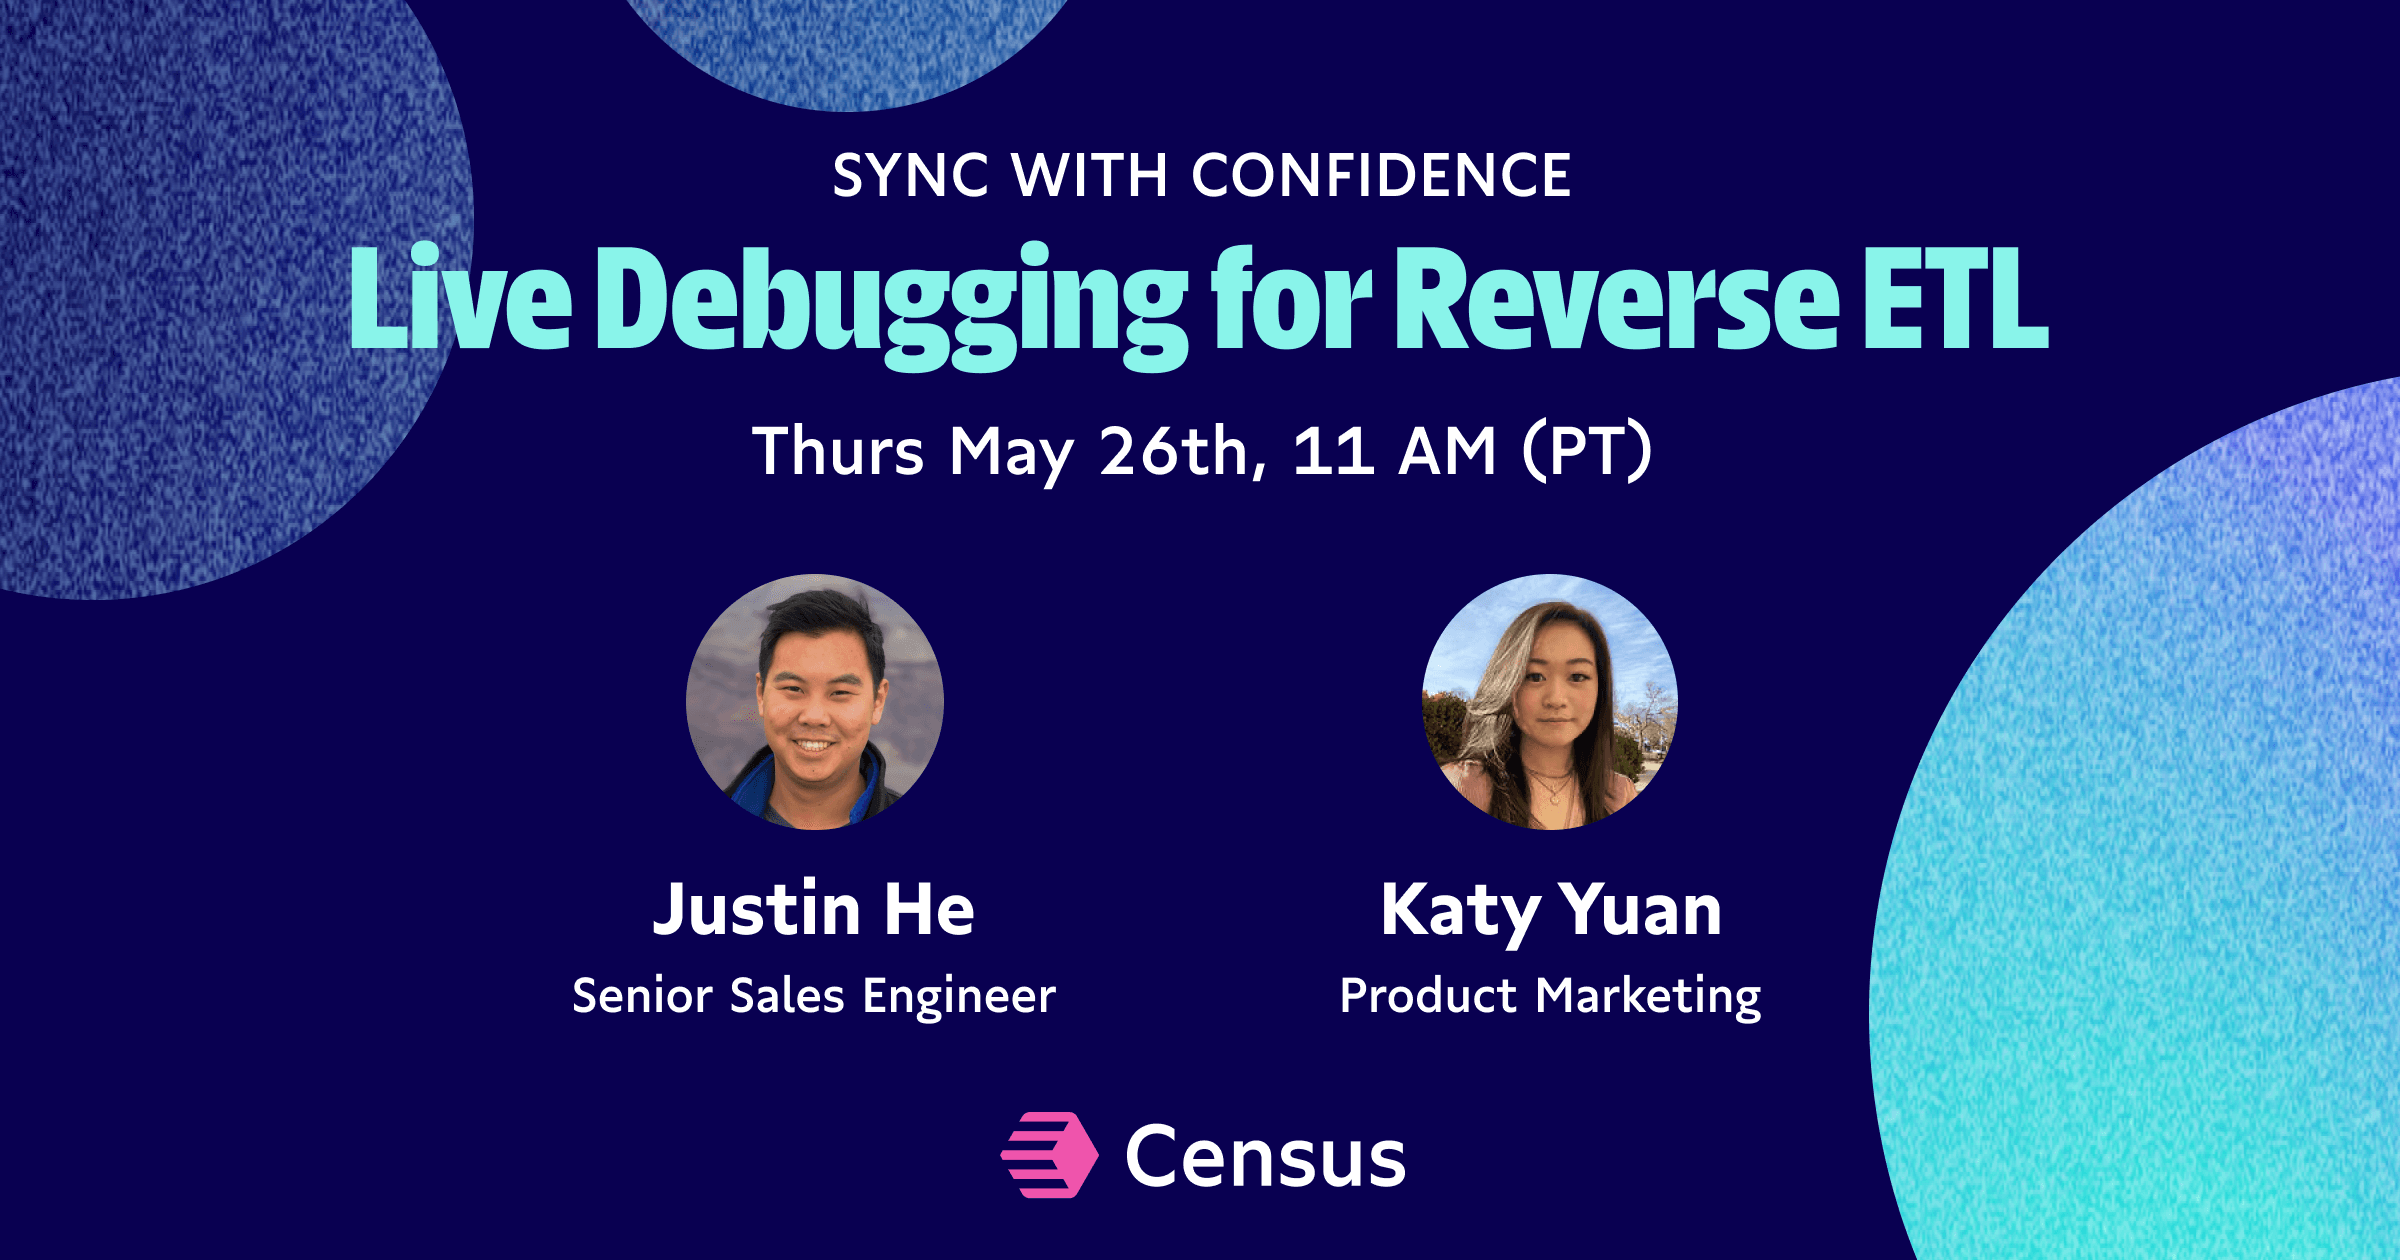 Sync with Confidence: Live Debugging for Reverse ETL